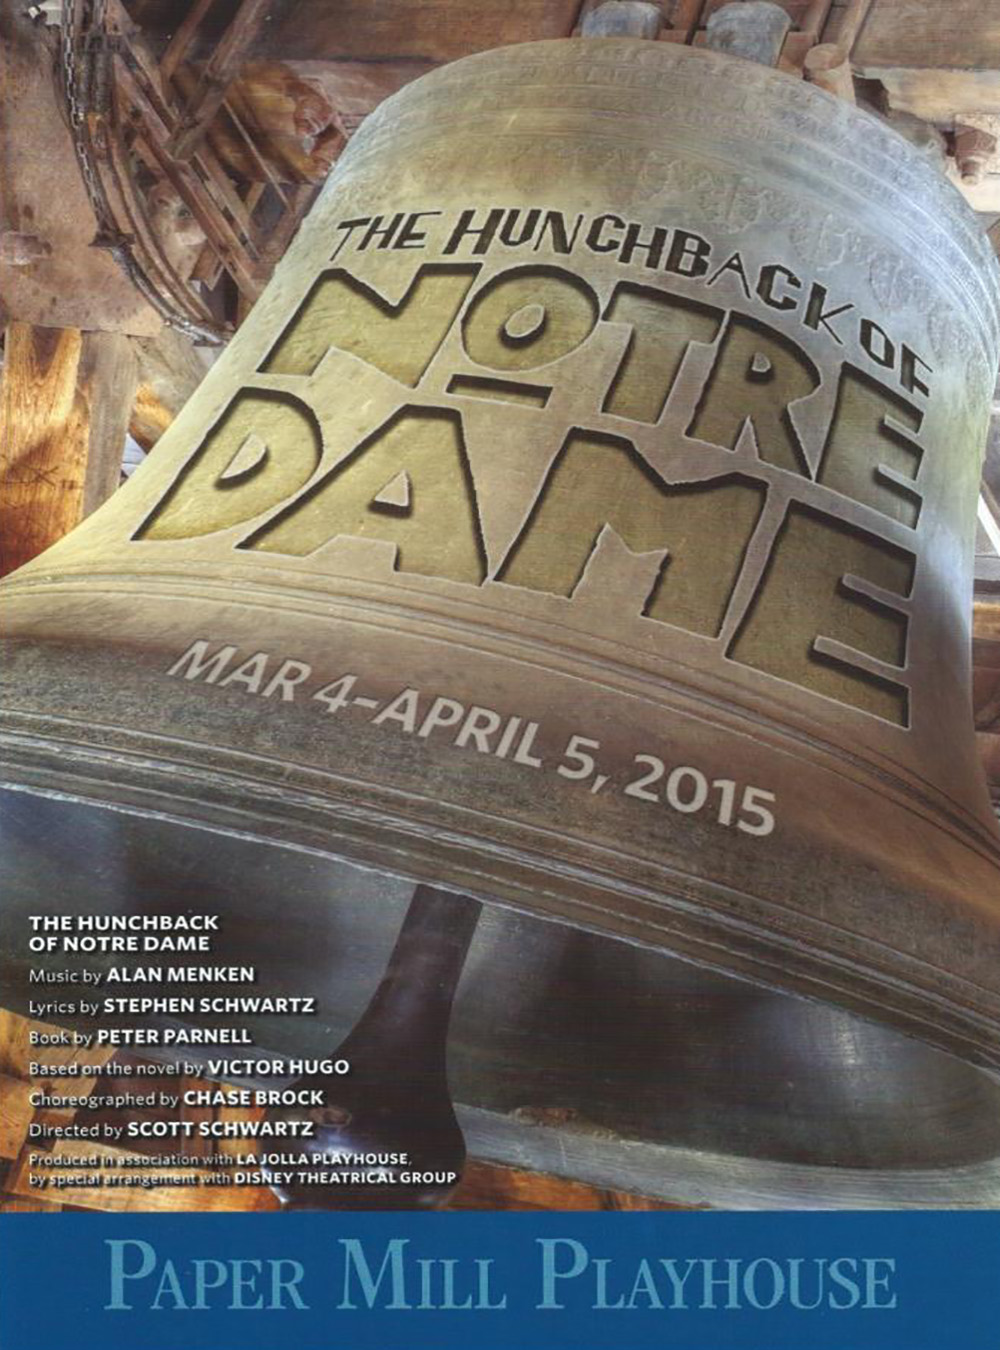 Hunchback of Notre Dame at Papermill Playhouse